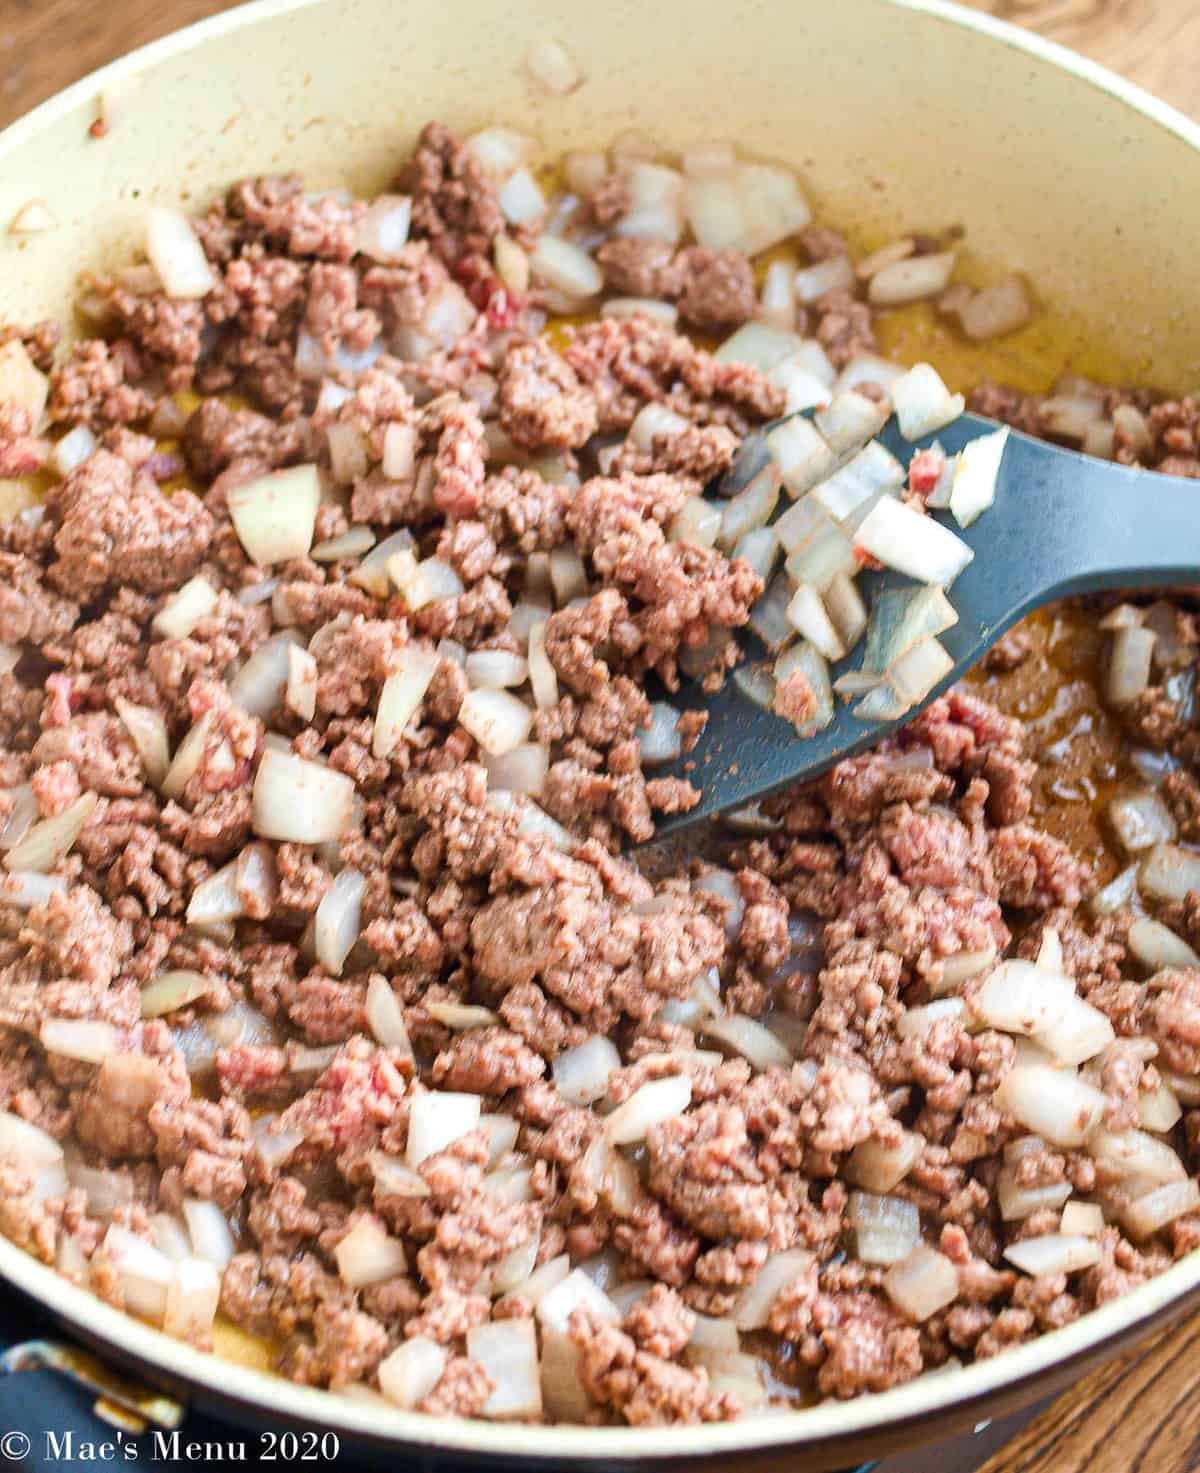 A side angle sot of a saute pan full of crumbled ground meat and onions